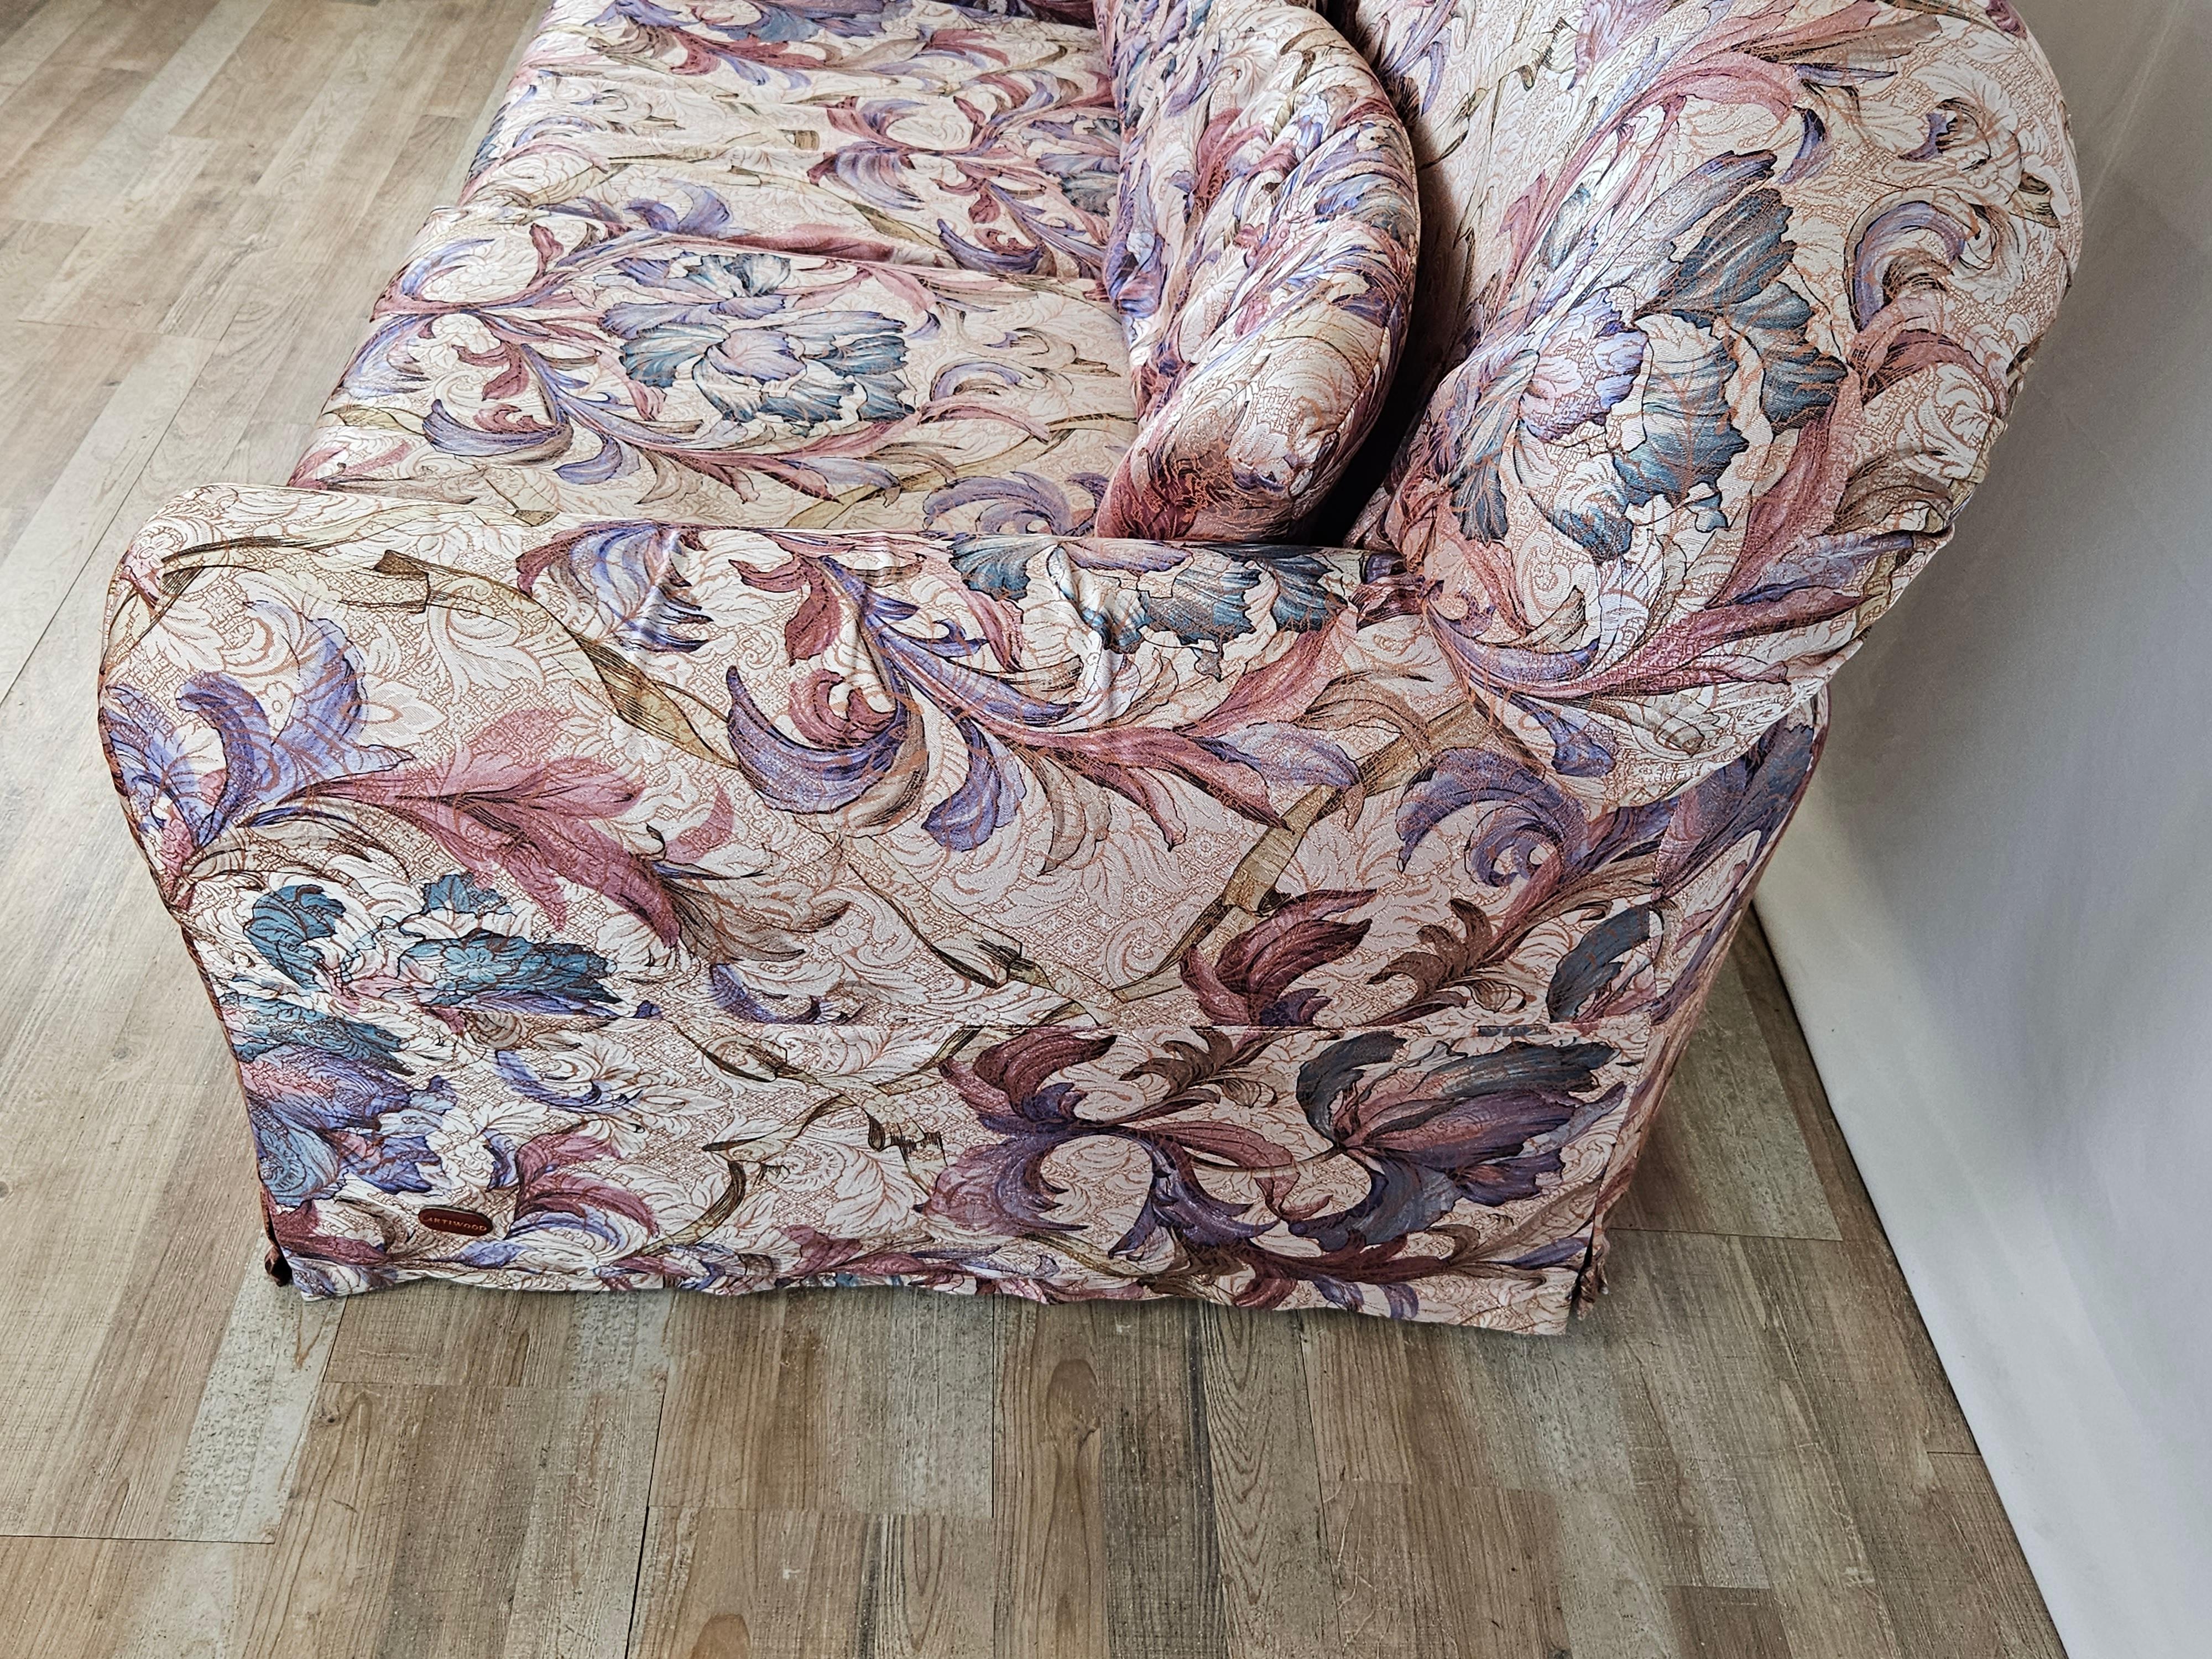 Modern and lively 1970s two-seater sofa upholstered in a very dramatic and eye-catching floral fabric.

The sofa is in very good condition, giving fresh and cheerful touches to modern and vintage environments.

Perfect in an entryway, summer house